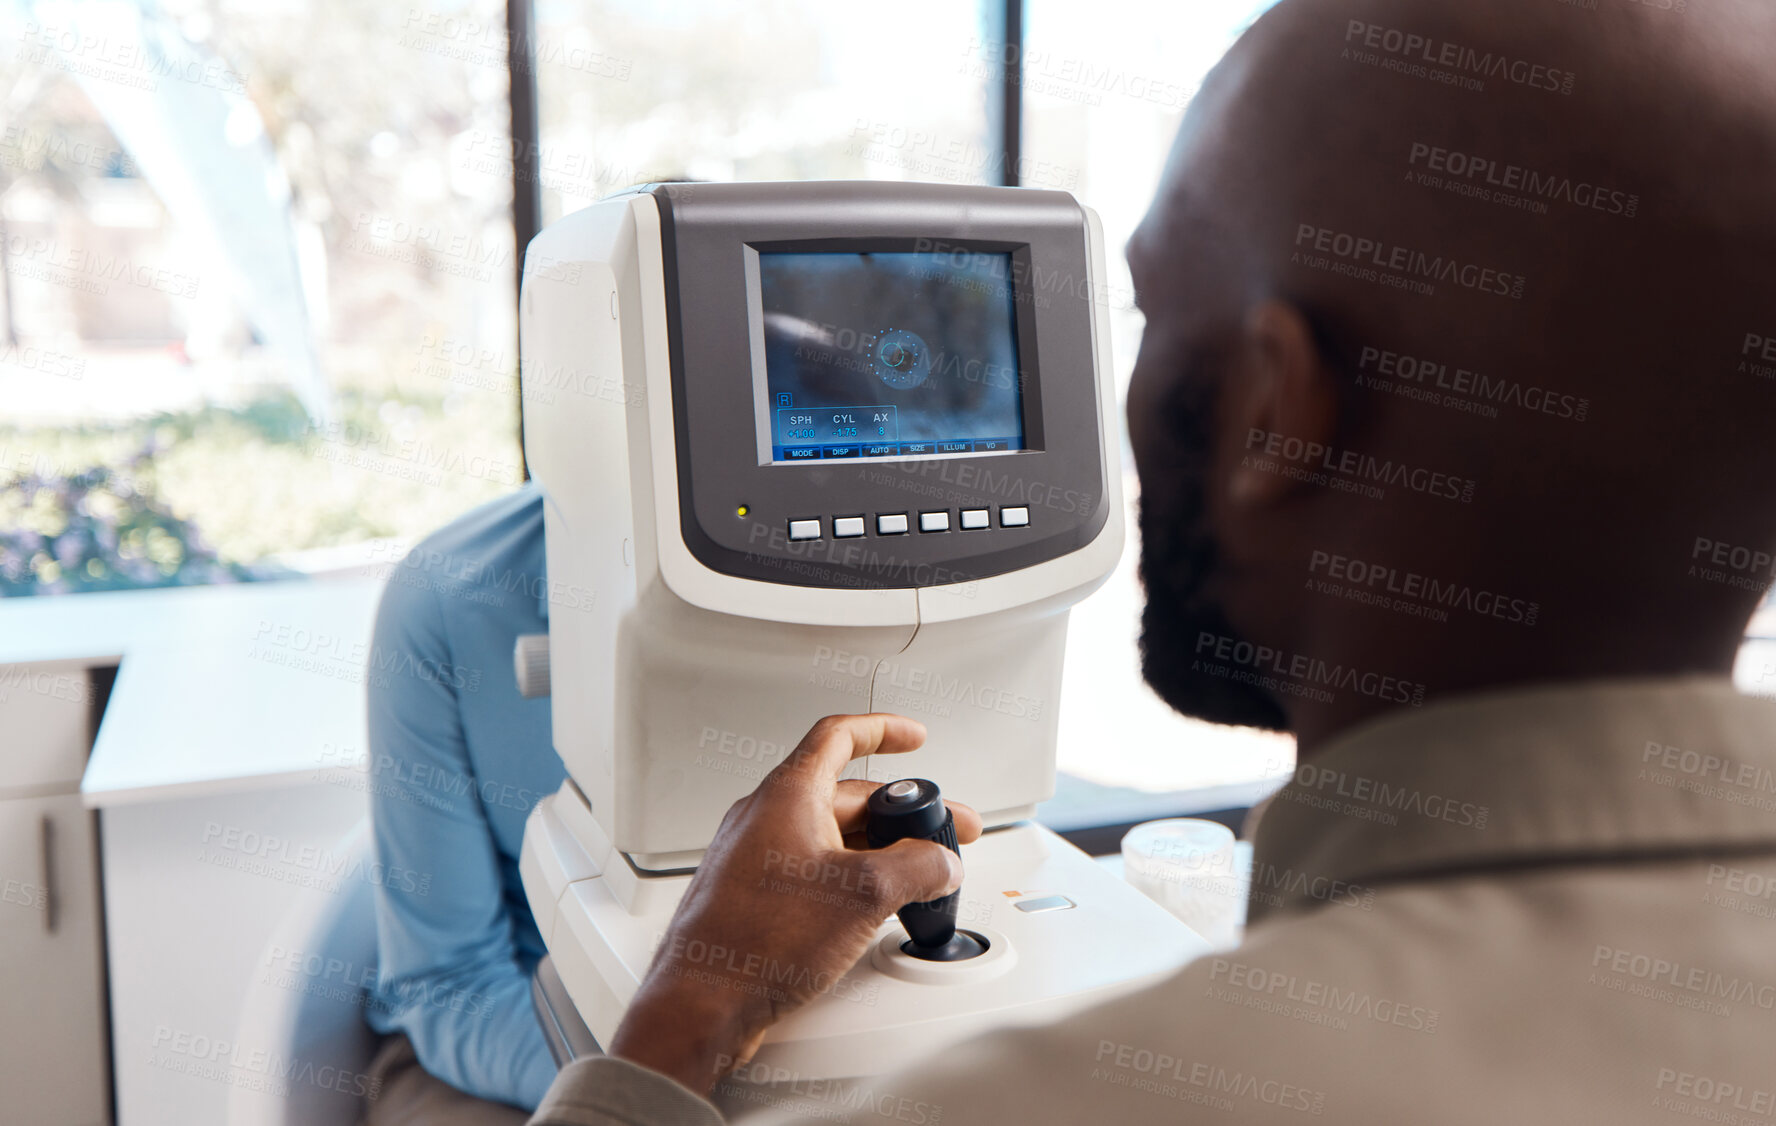 Buy stock photo Eye exam by a doctor looking and checking the vision of a patient at a sight specialist office. Medical healthcare screen technology helping an optometrist see retina health and wellness 